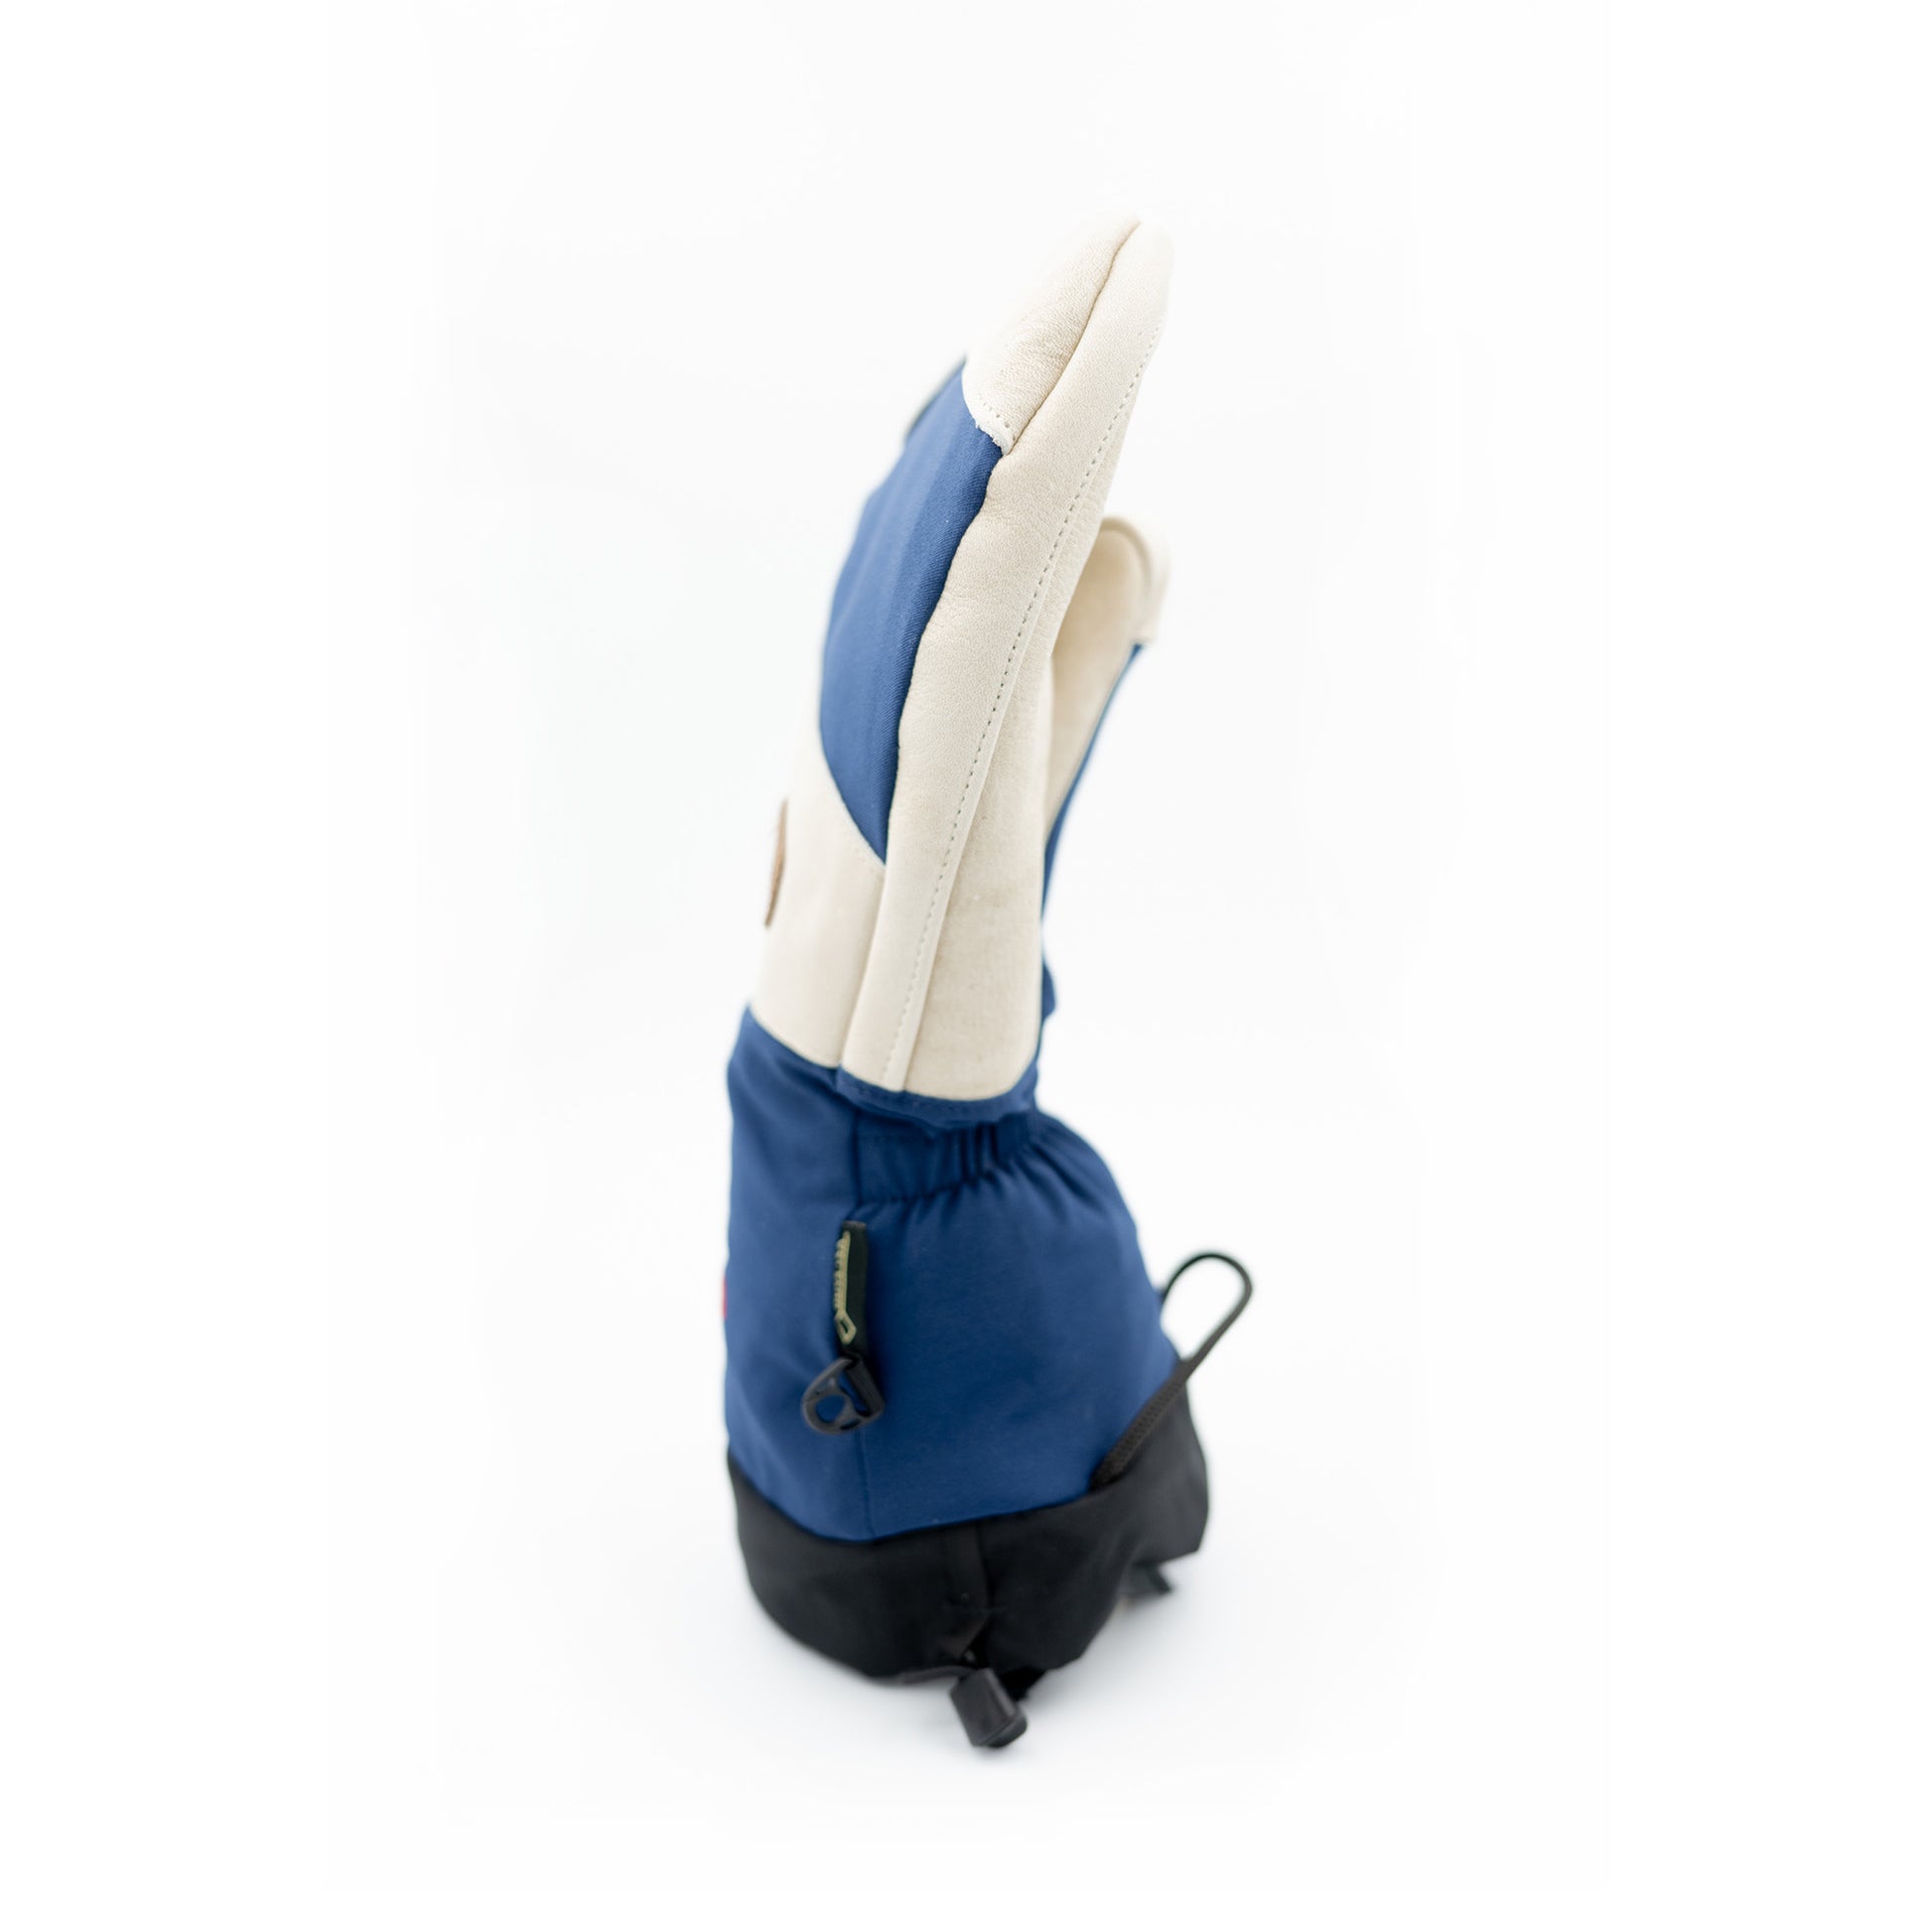 A blue and white Mainers Mitts from Mainers on a white background, designed for resistance and durability.